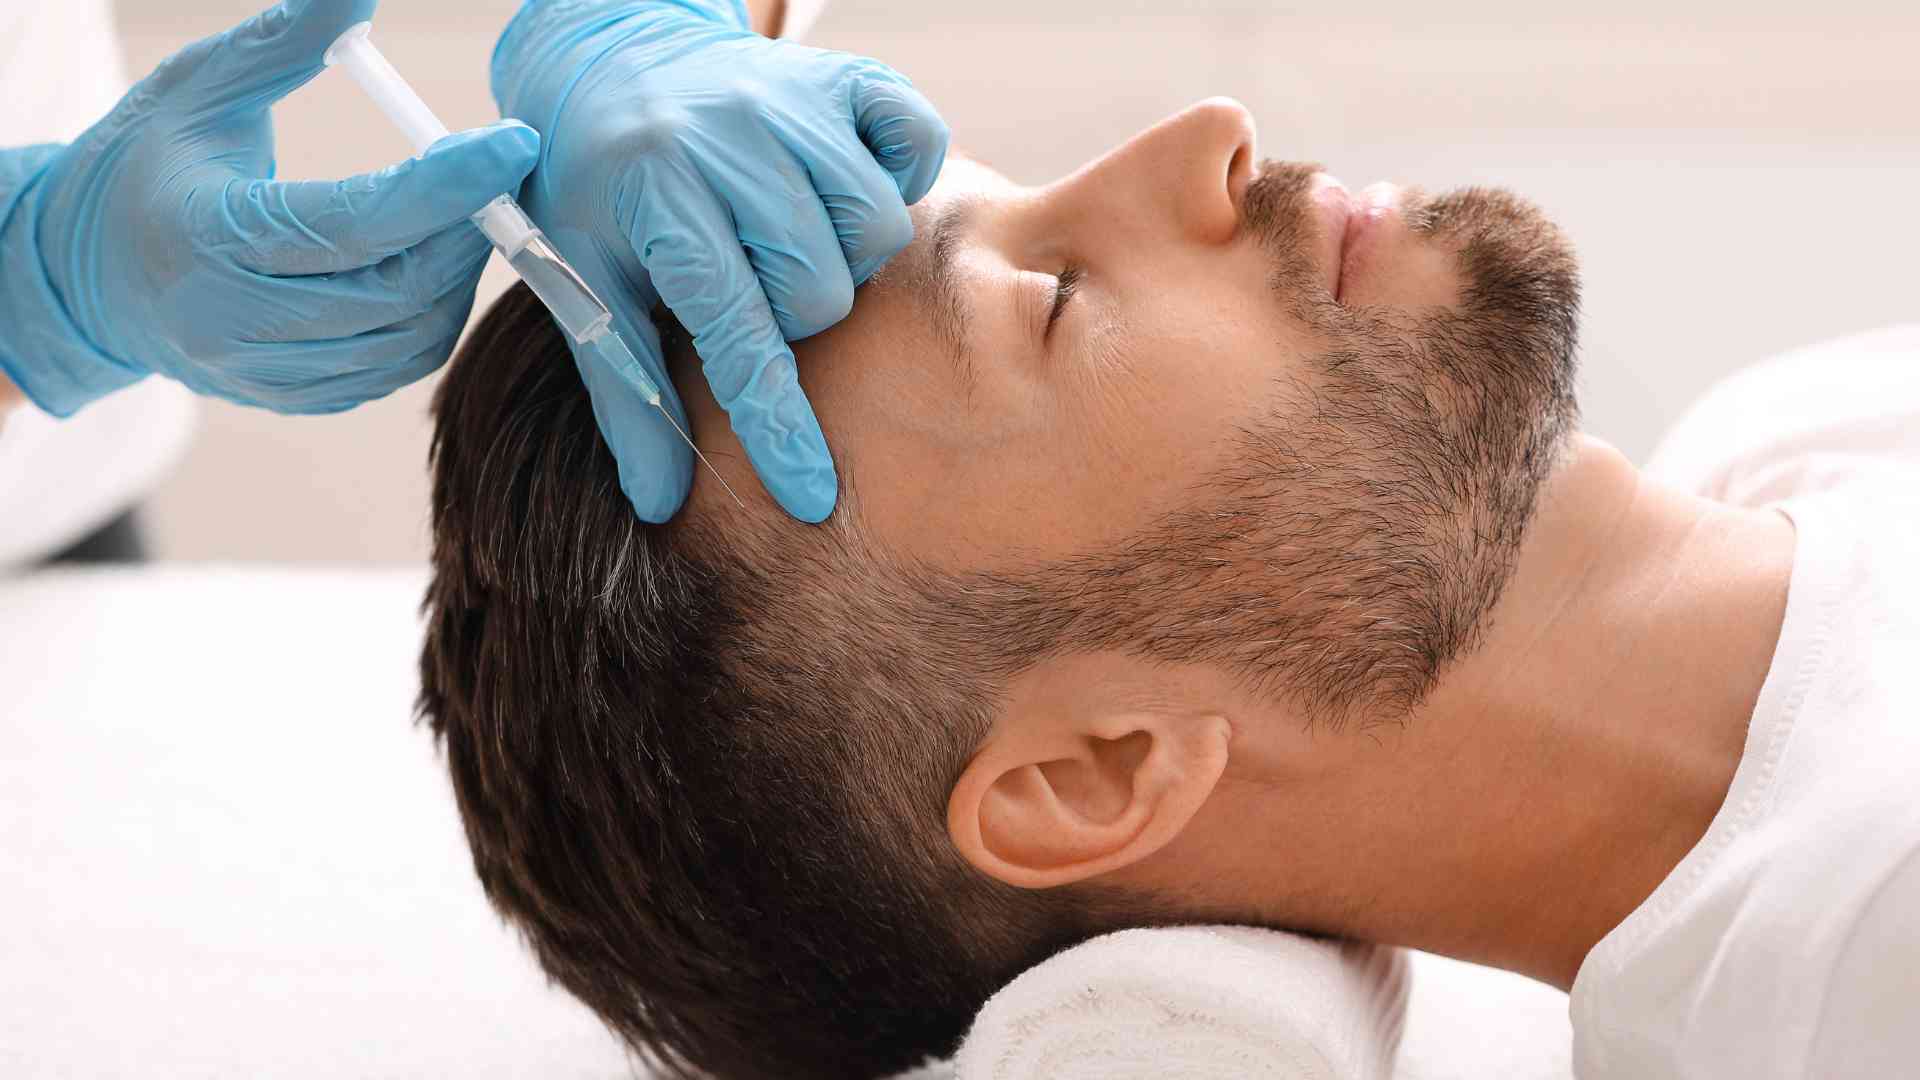 Can certain hairstyles or hair treatments lead to less common types of hair loss